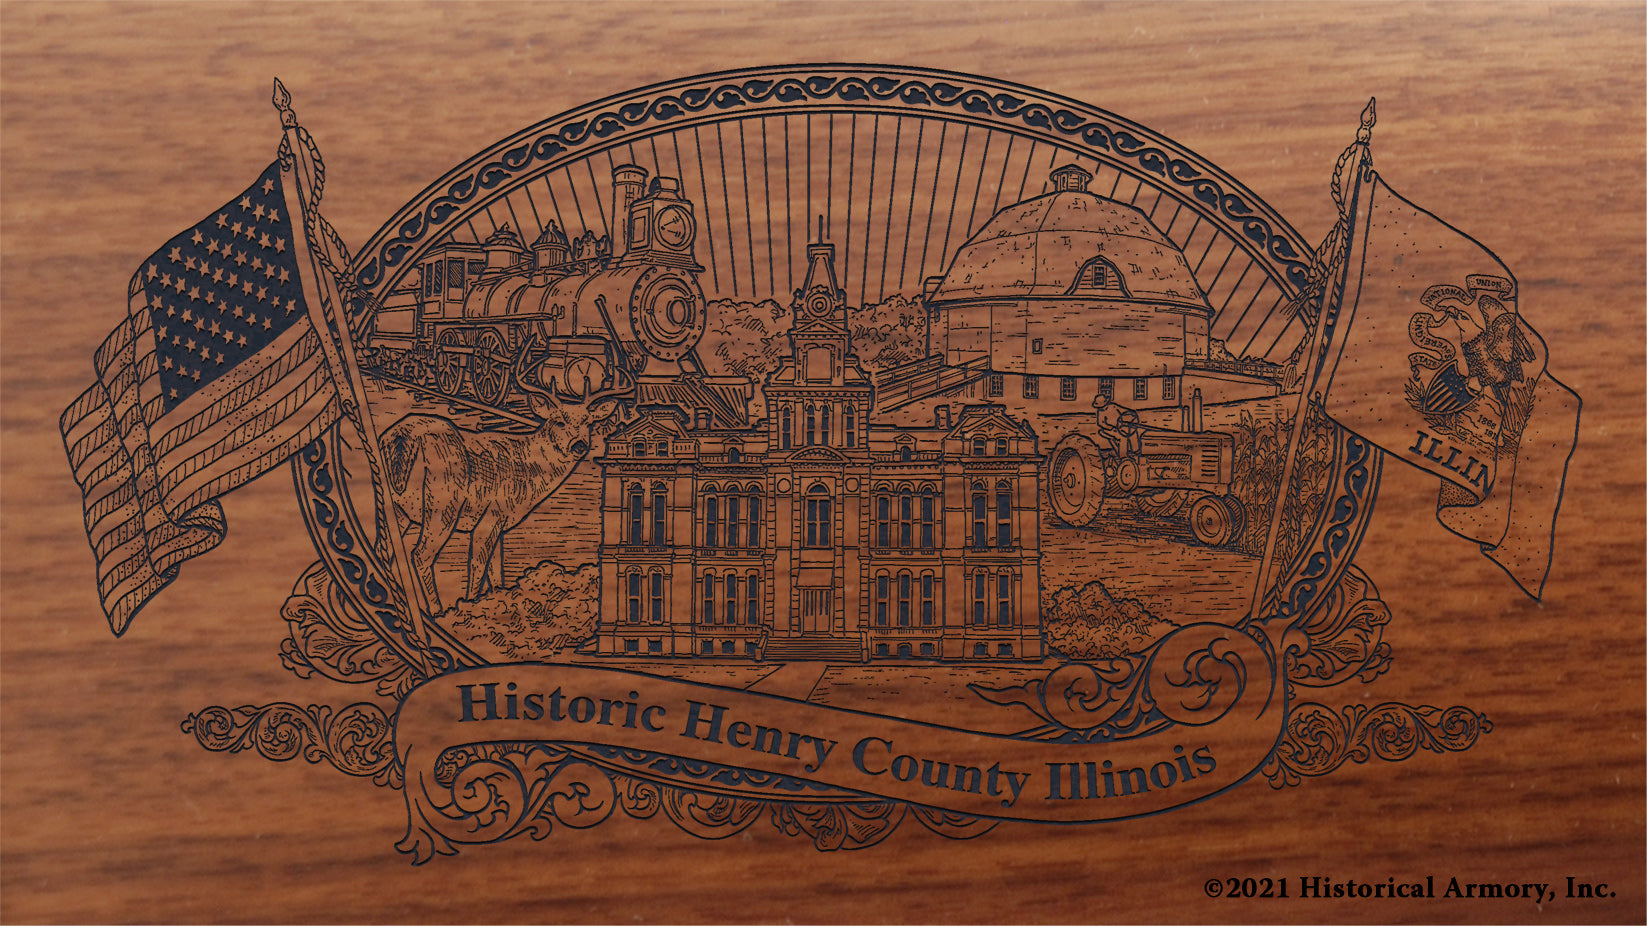 Engraved artwork | History of Henry County Illinois | Historical Armory